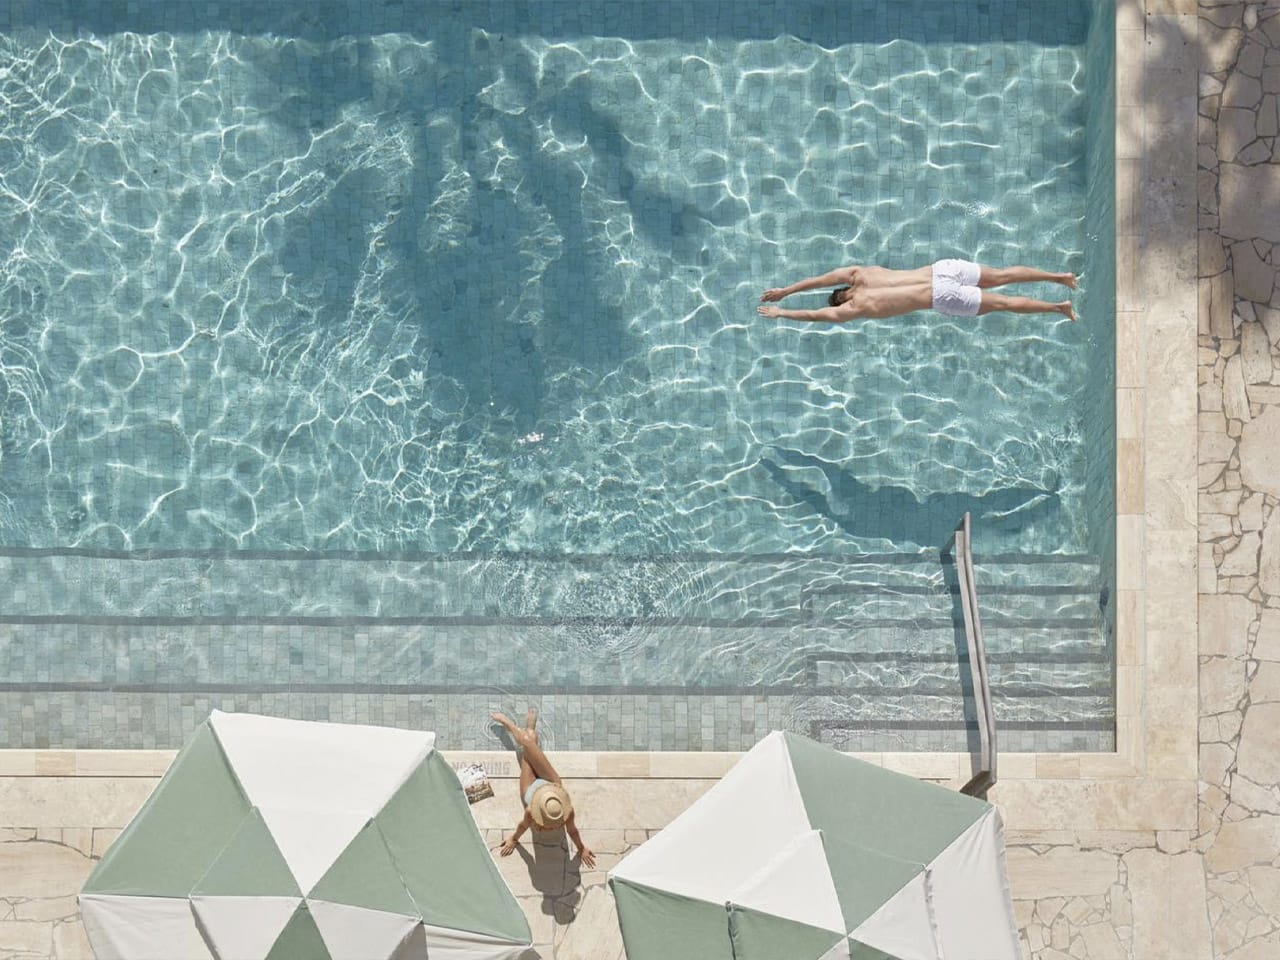 Overhead view of pool with male diving in and female sitting on side